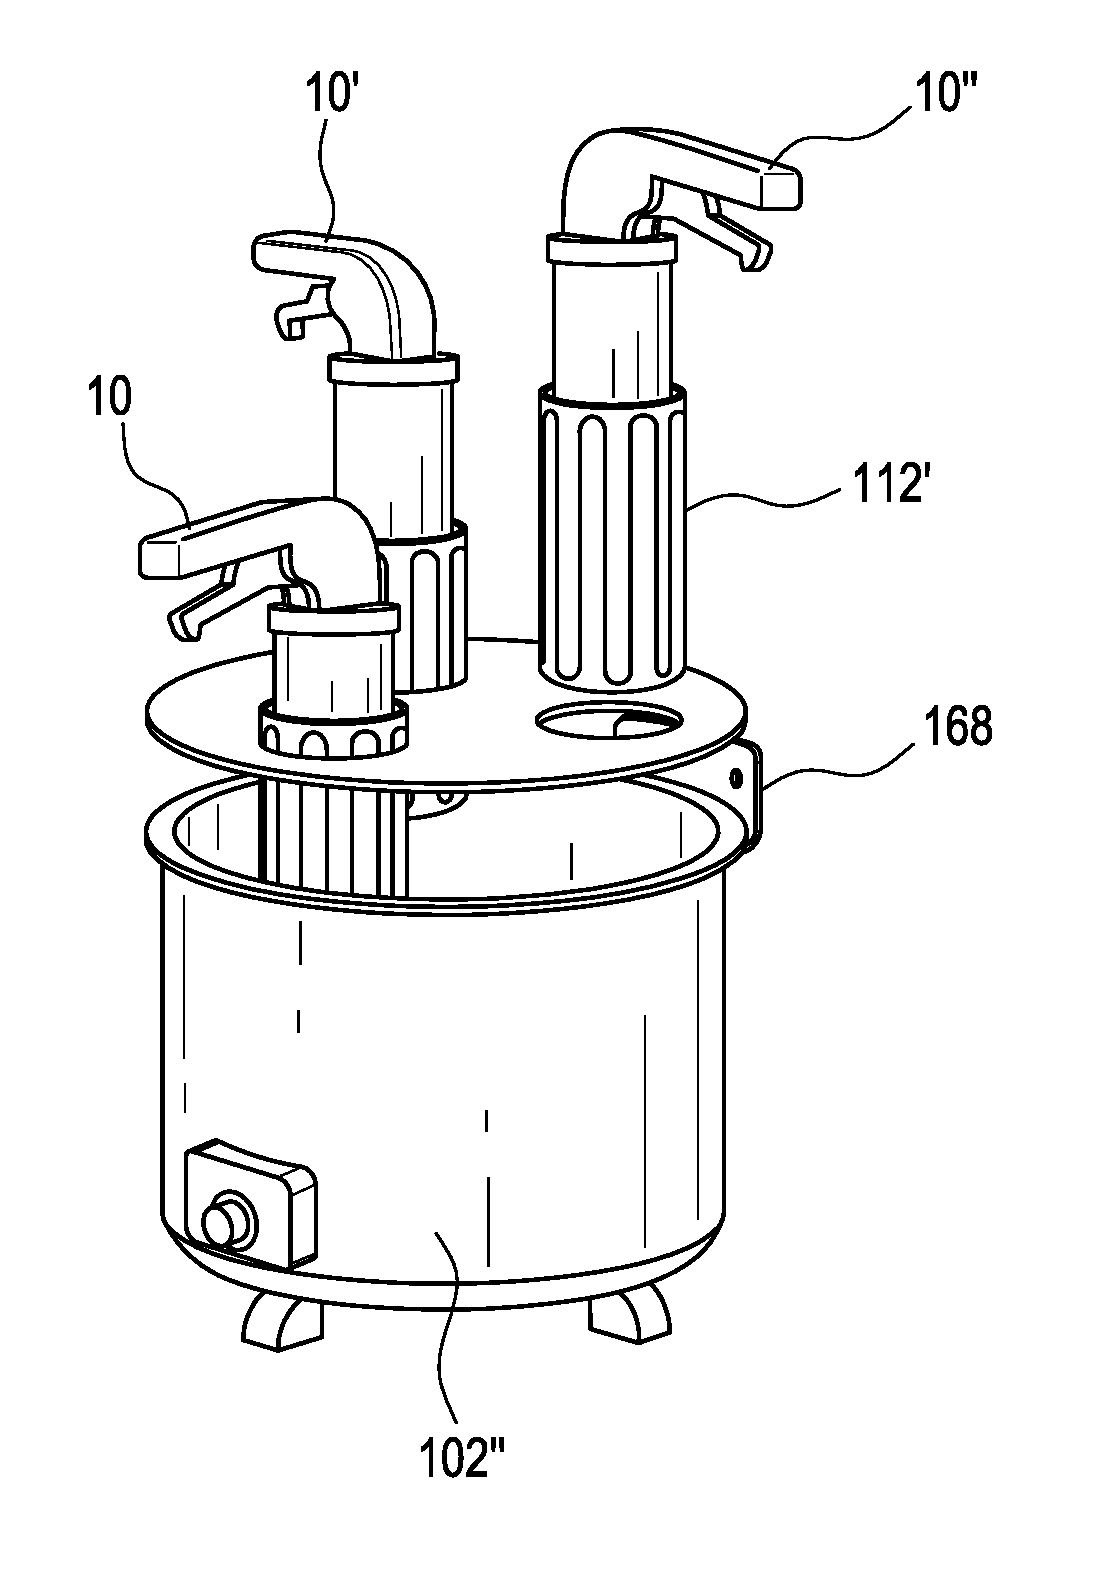 Food warming appliance specifically for warming cheese or other semi-solid substances or products, and a cheese dispensing station comprising the appliance and gun